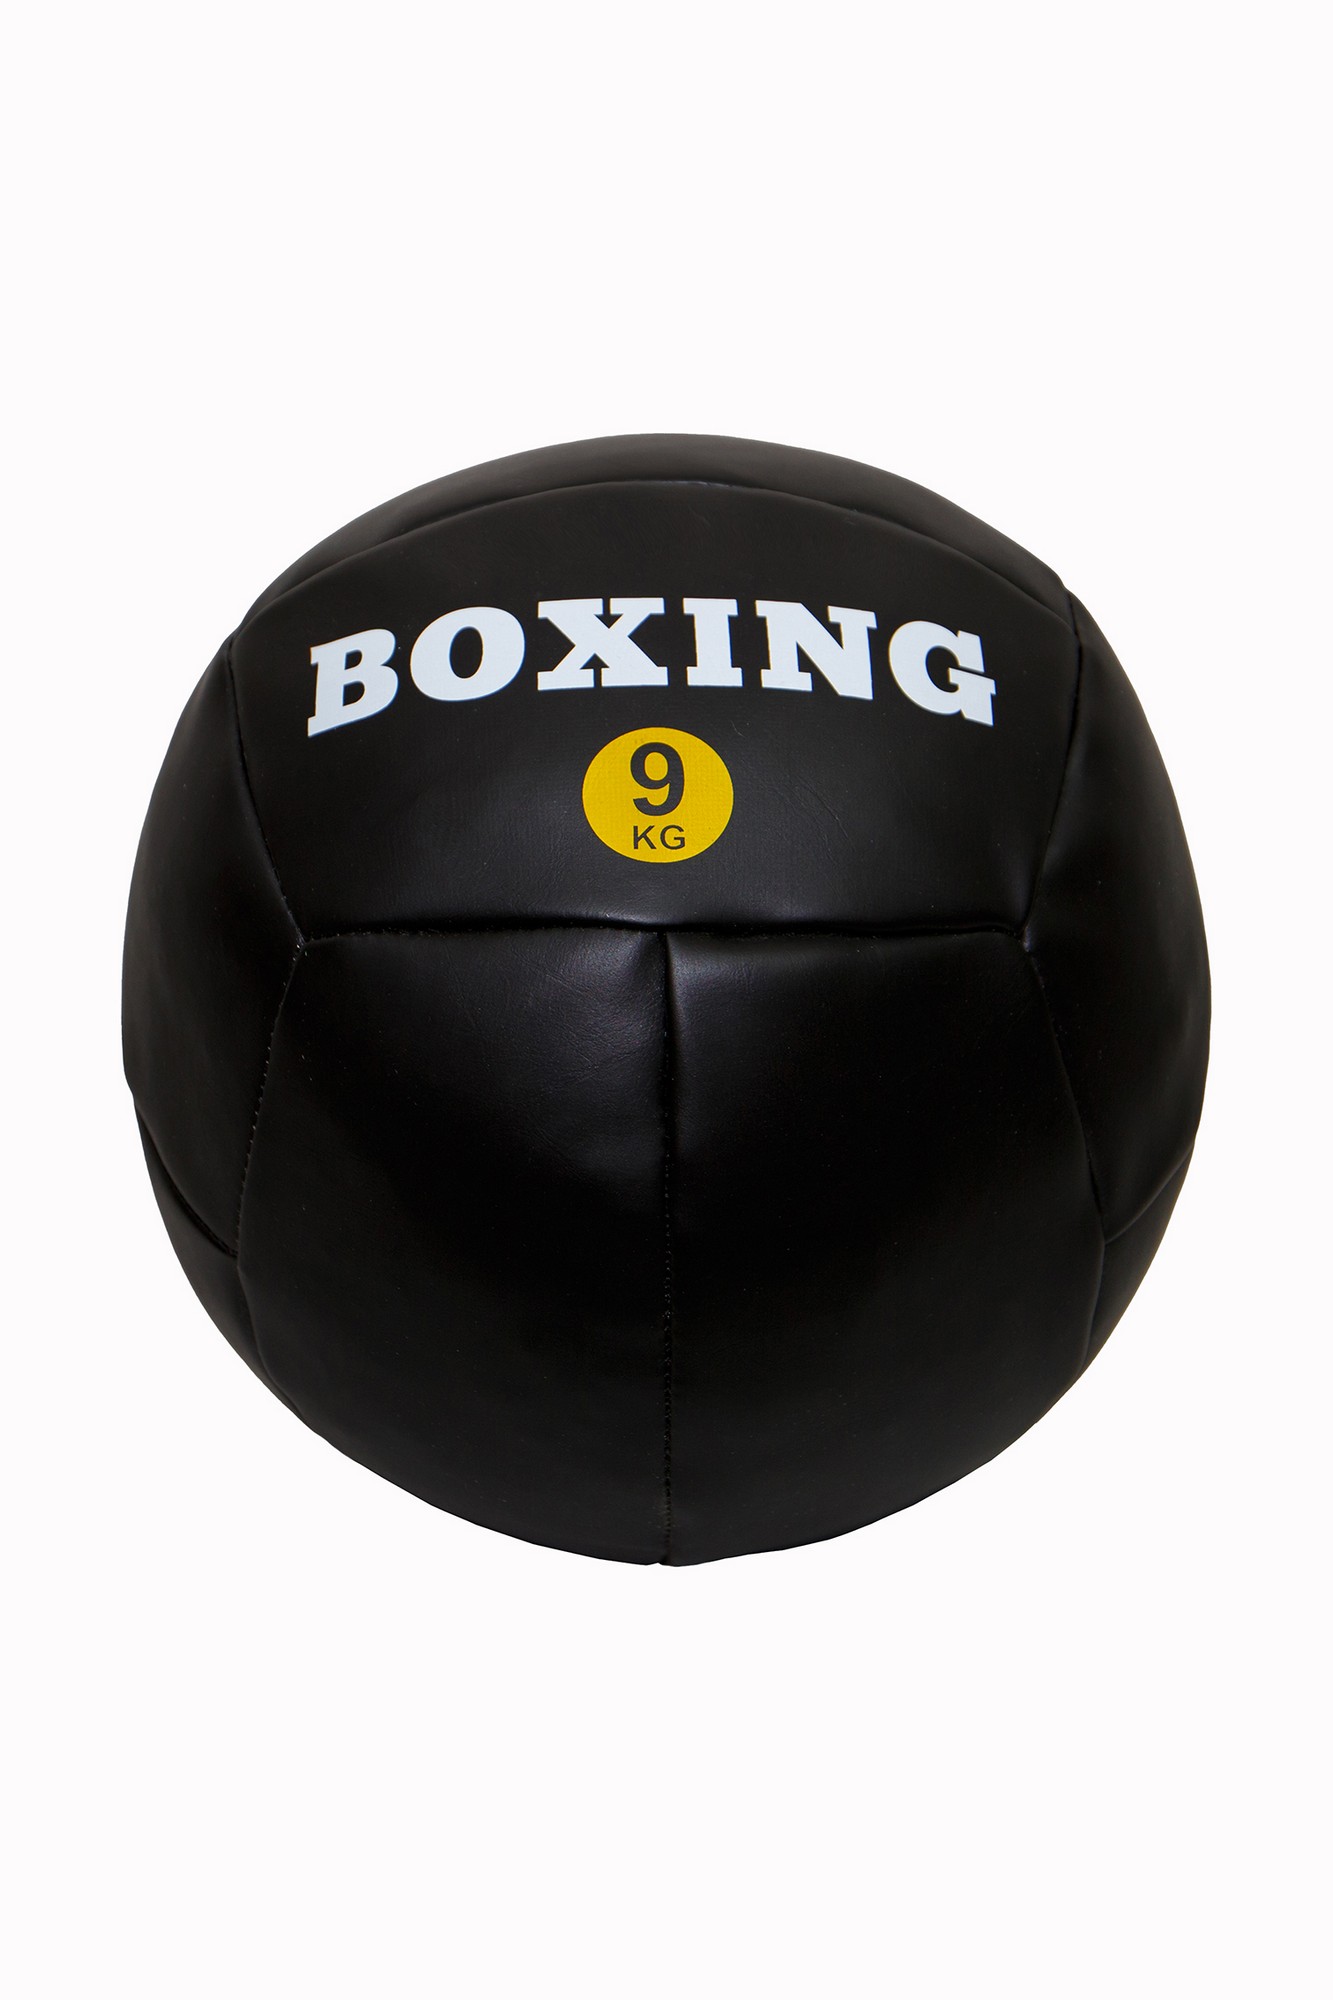 Медицинбол 9кг Totalbox Boxing МДИБ-9 1333_2000